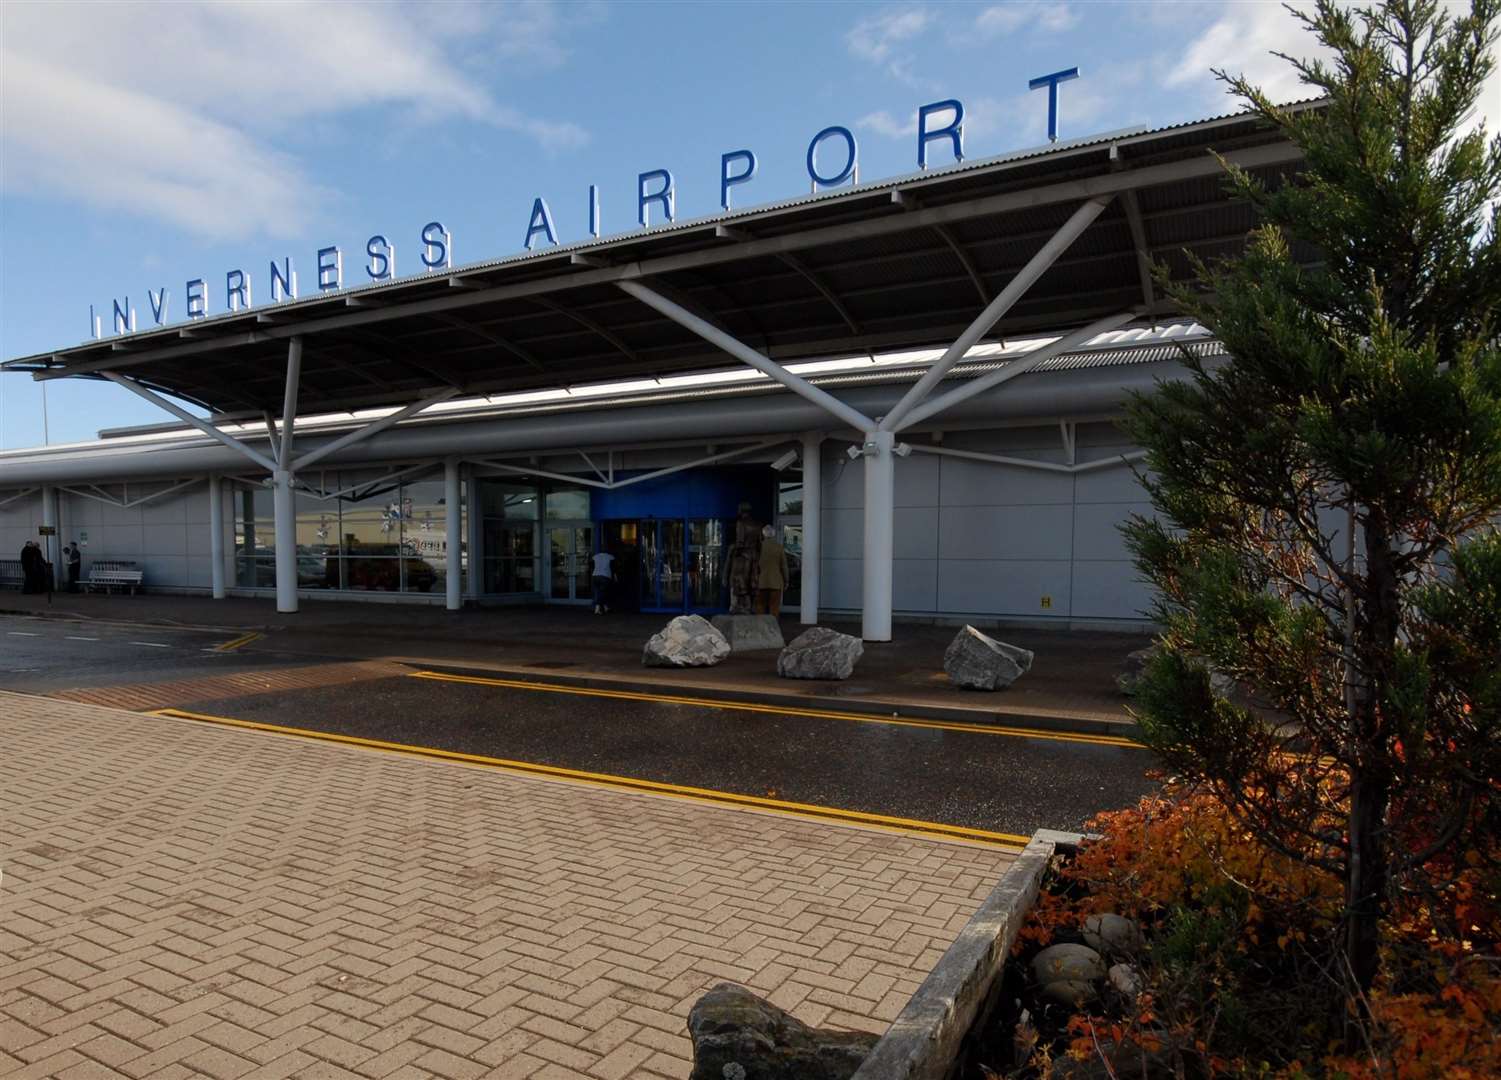 Passengers at Inverness Airport – and several other airports – could experience disruption.